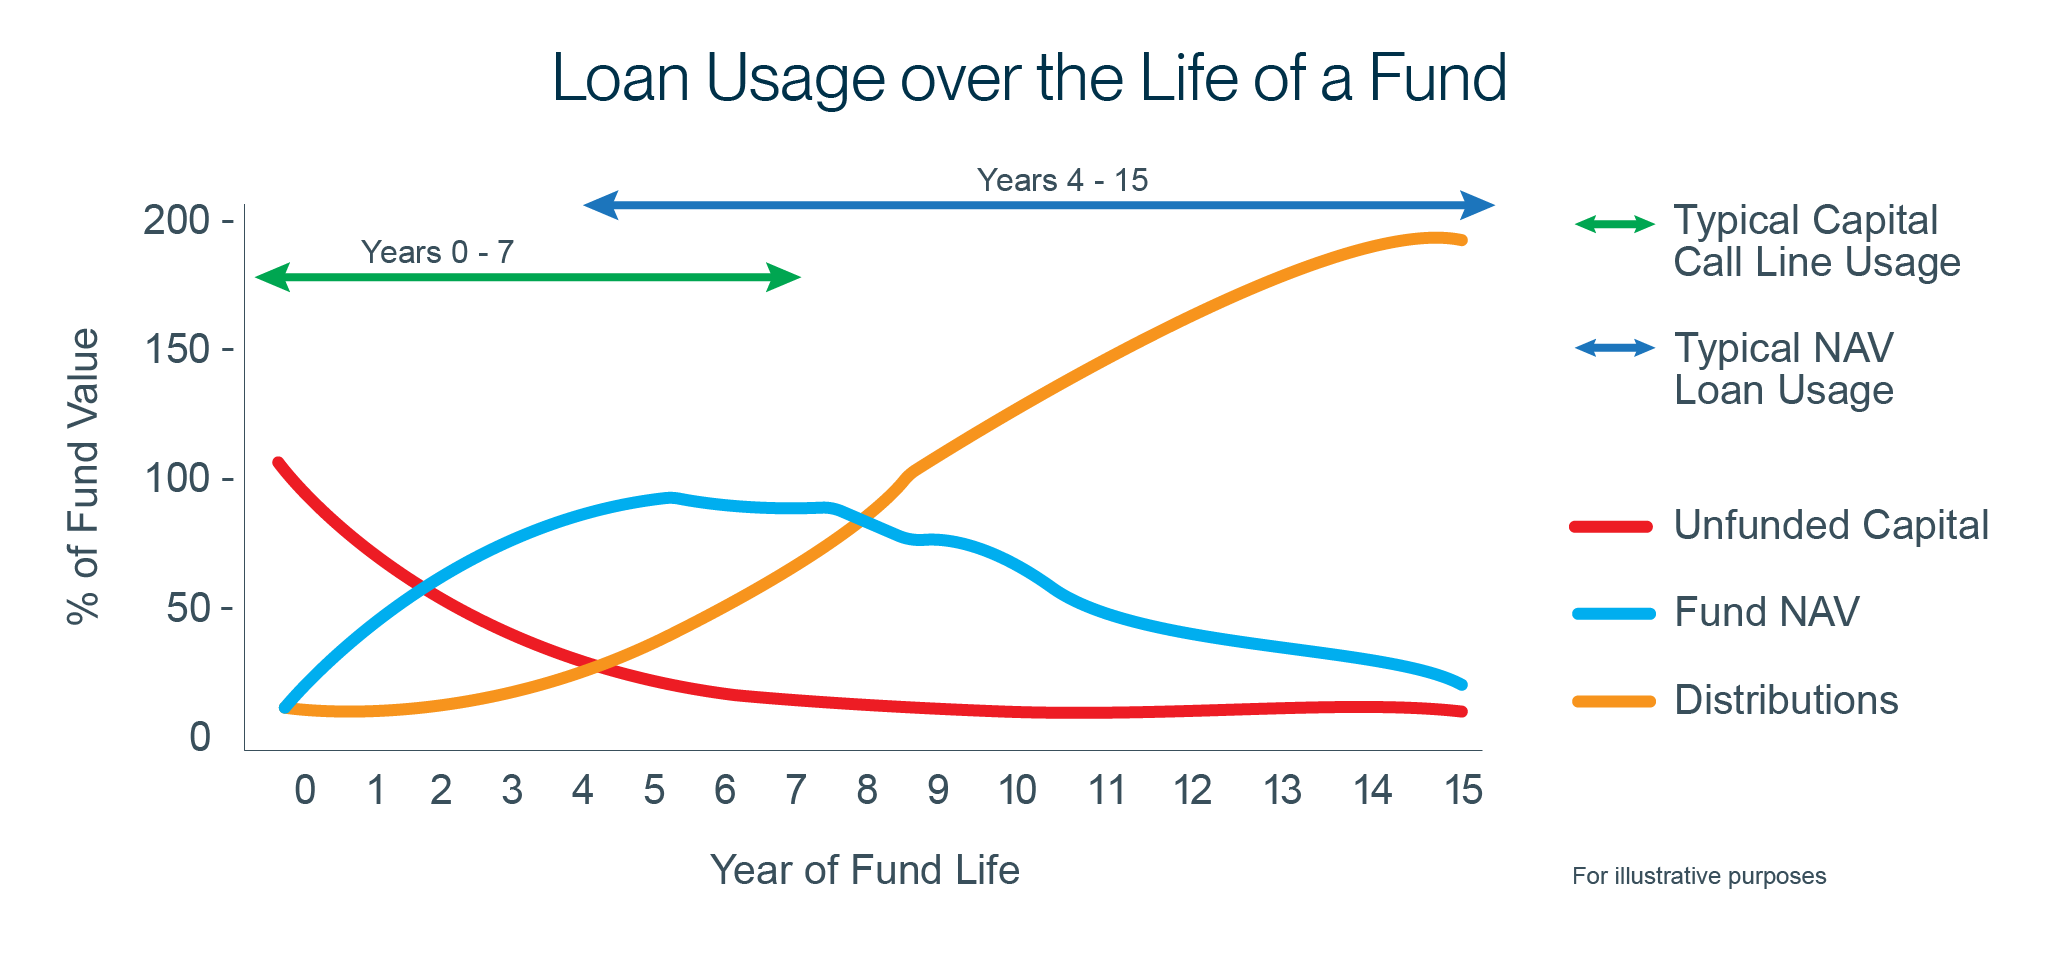 Loan Usage over the Life of a Fund Line Graph